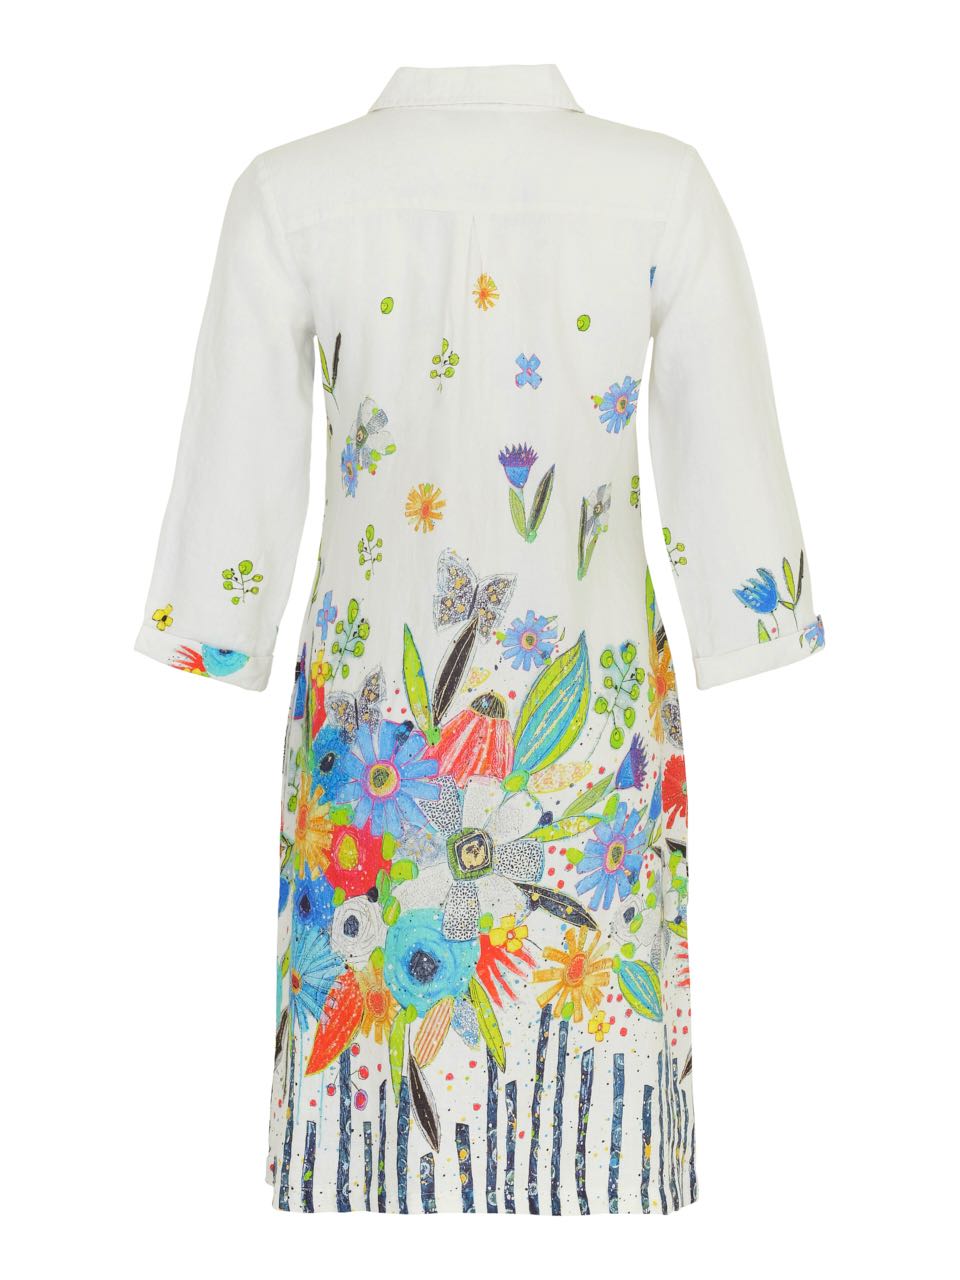 "New Bouquet Coming Soon" Art Print Linen Dress by Dolcezza